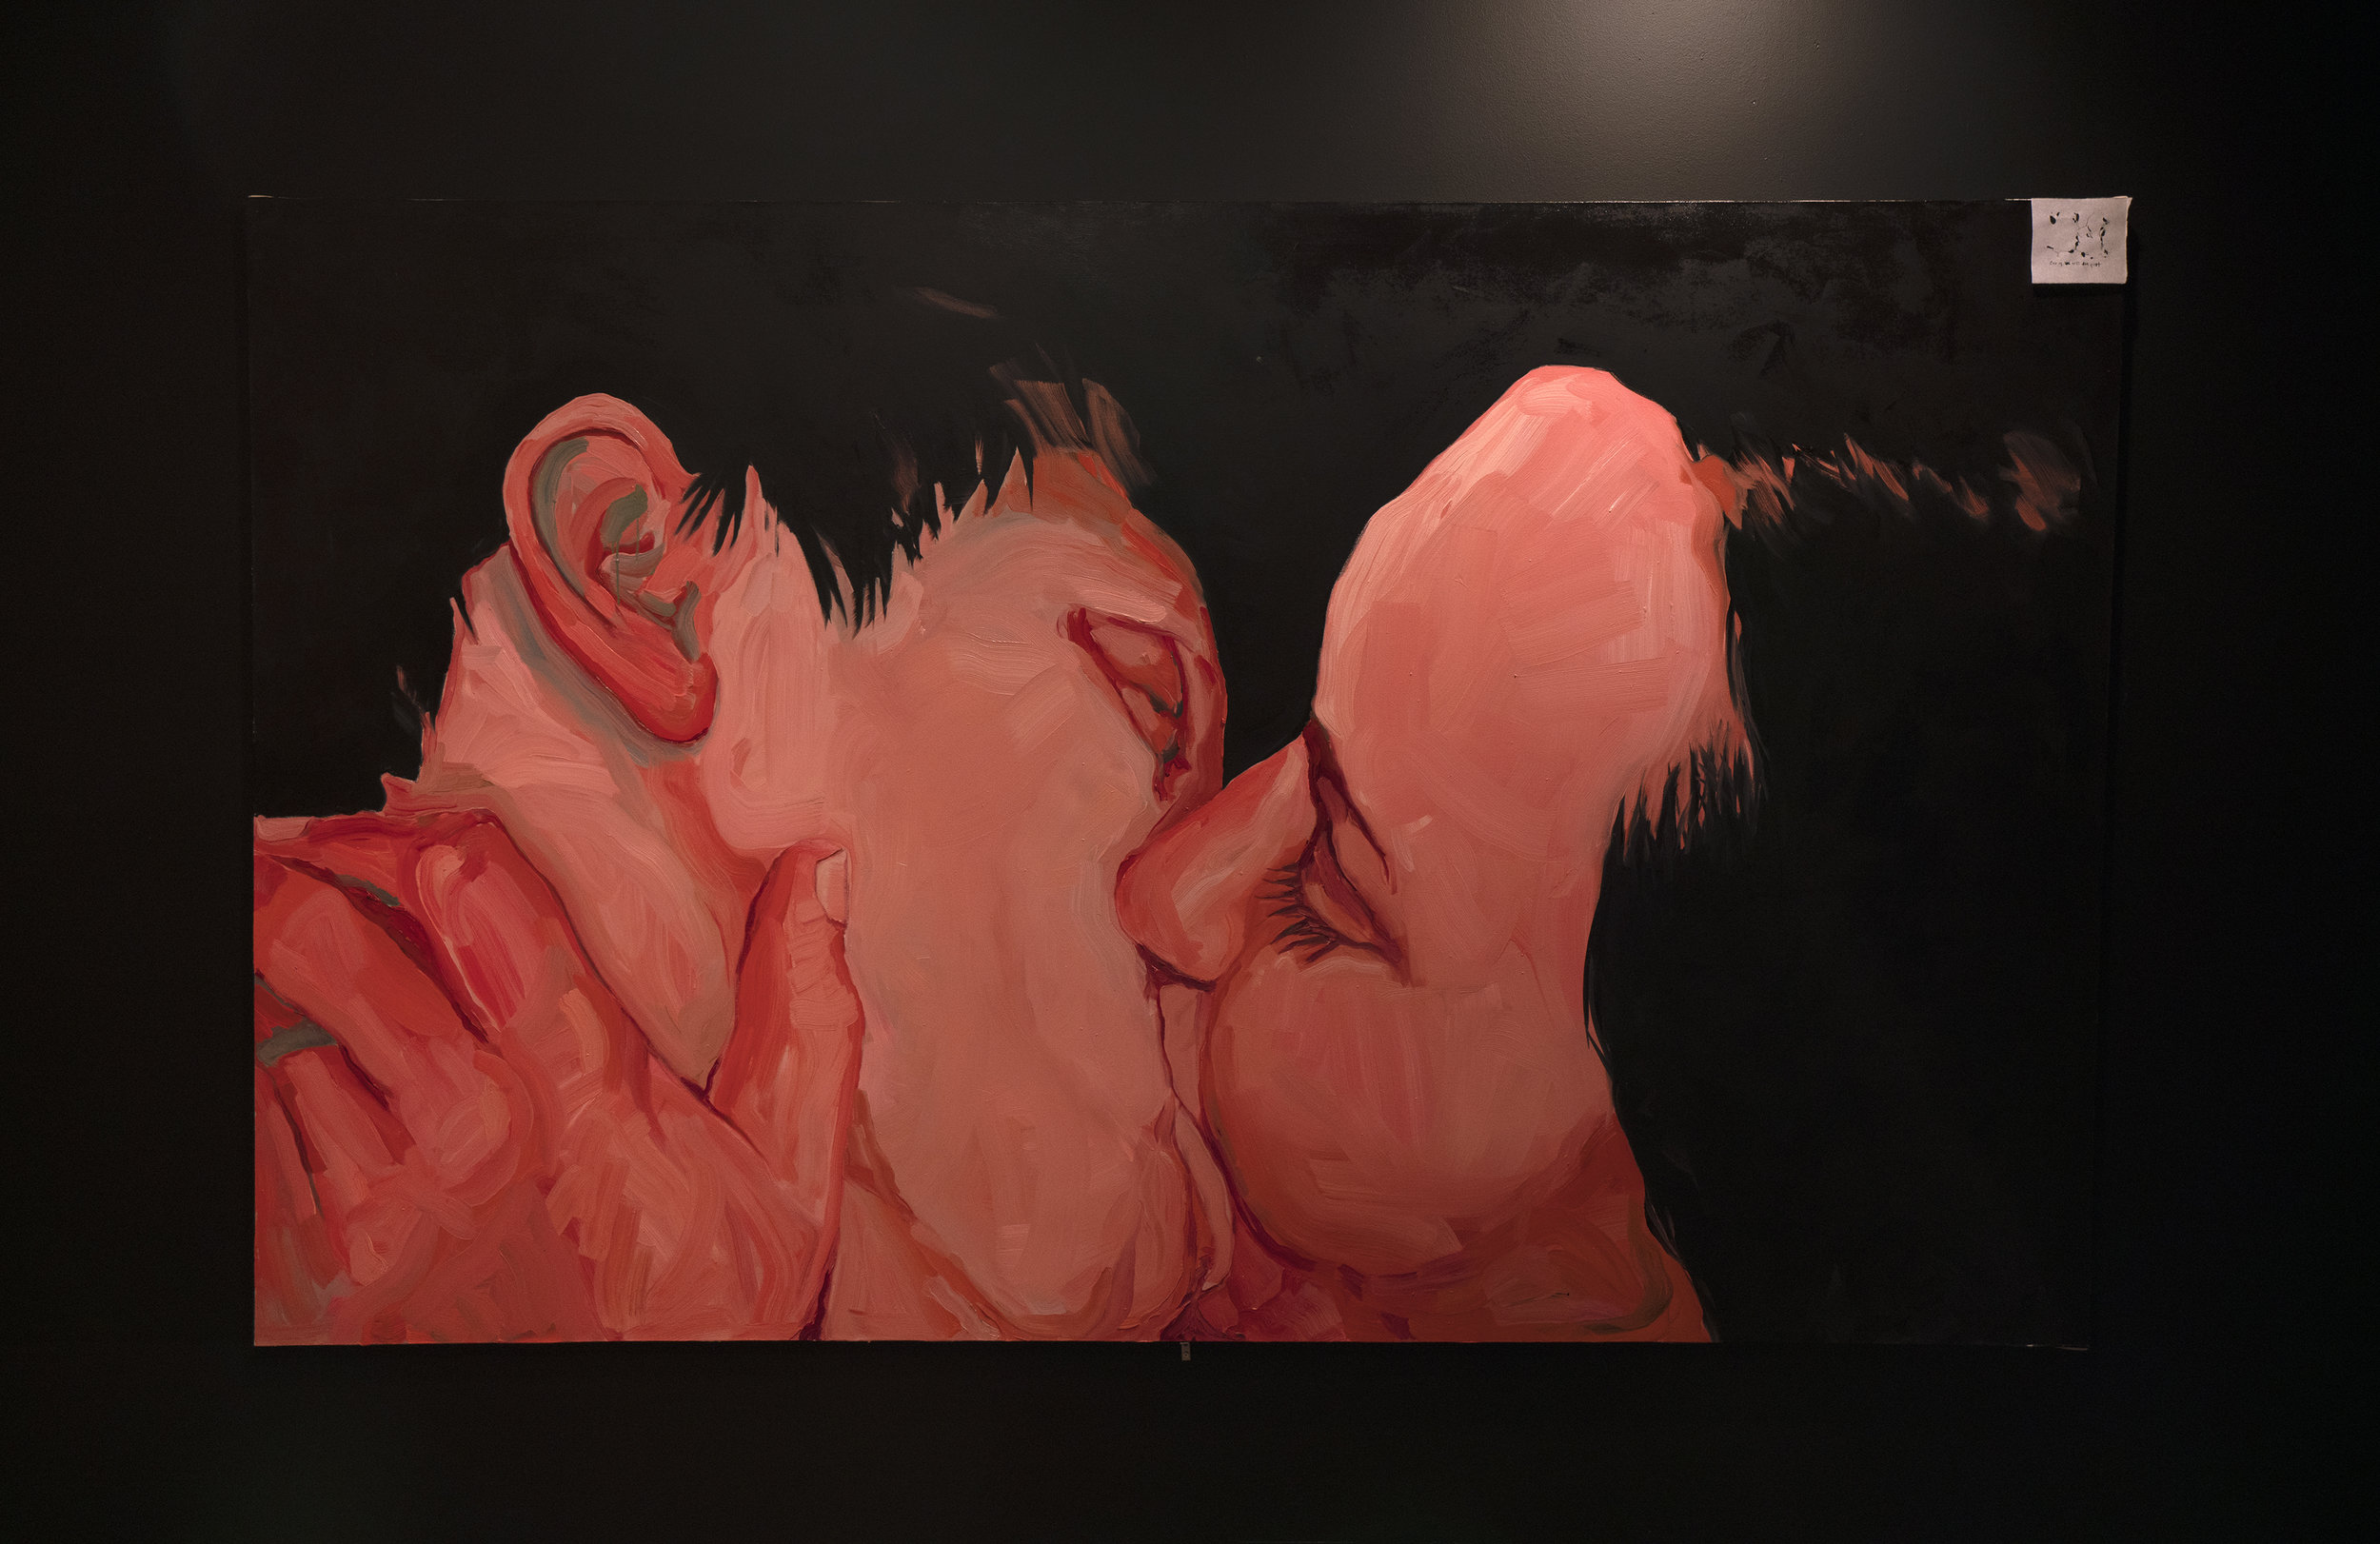 Mania Painting (Kissing). 6 x 9 foot oil on canvas. 2017